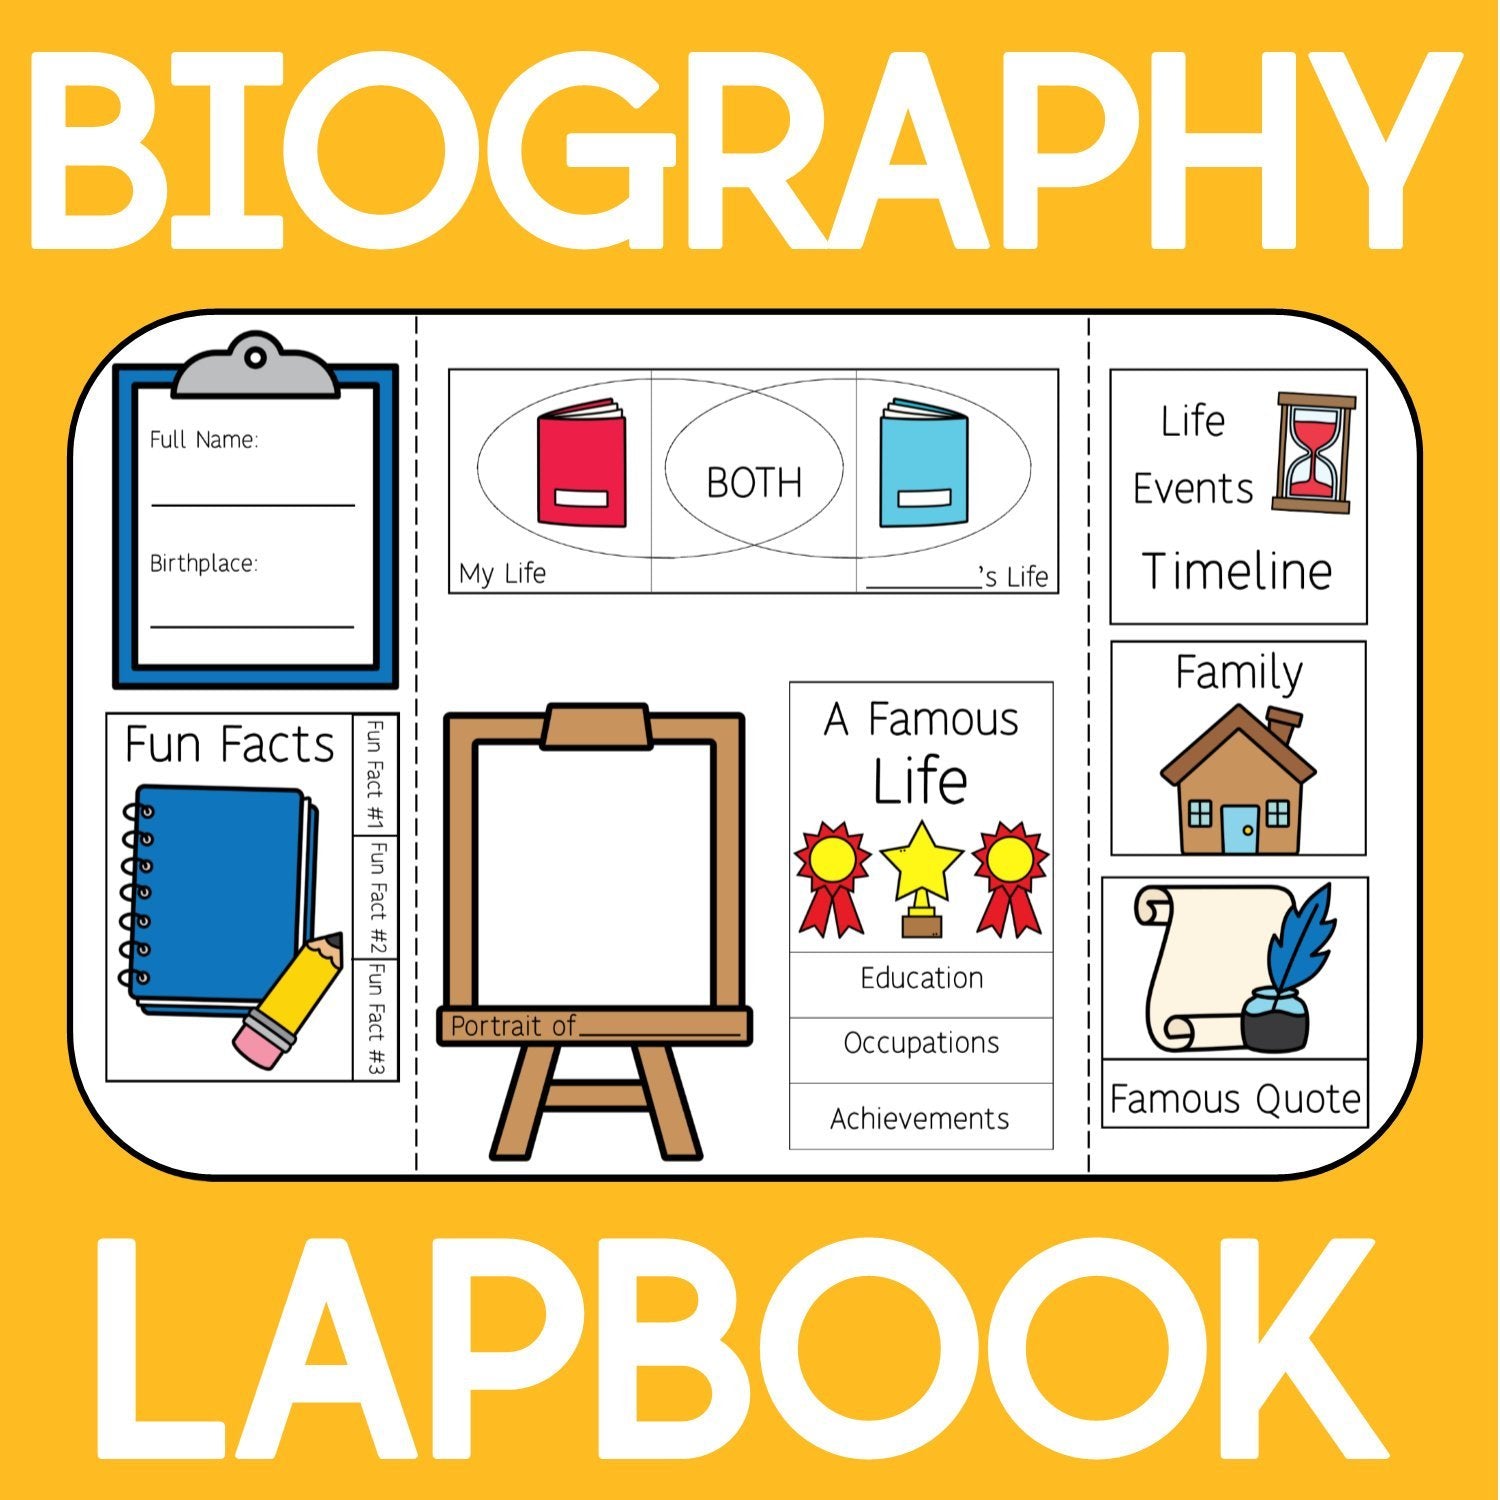 biography lapbook examples